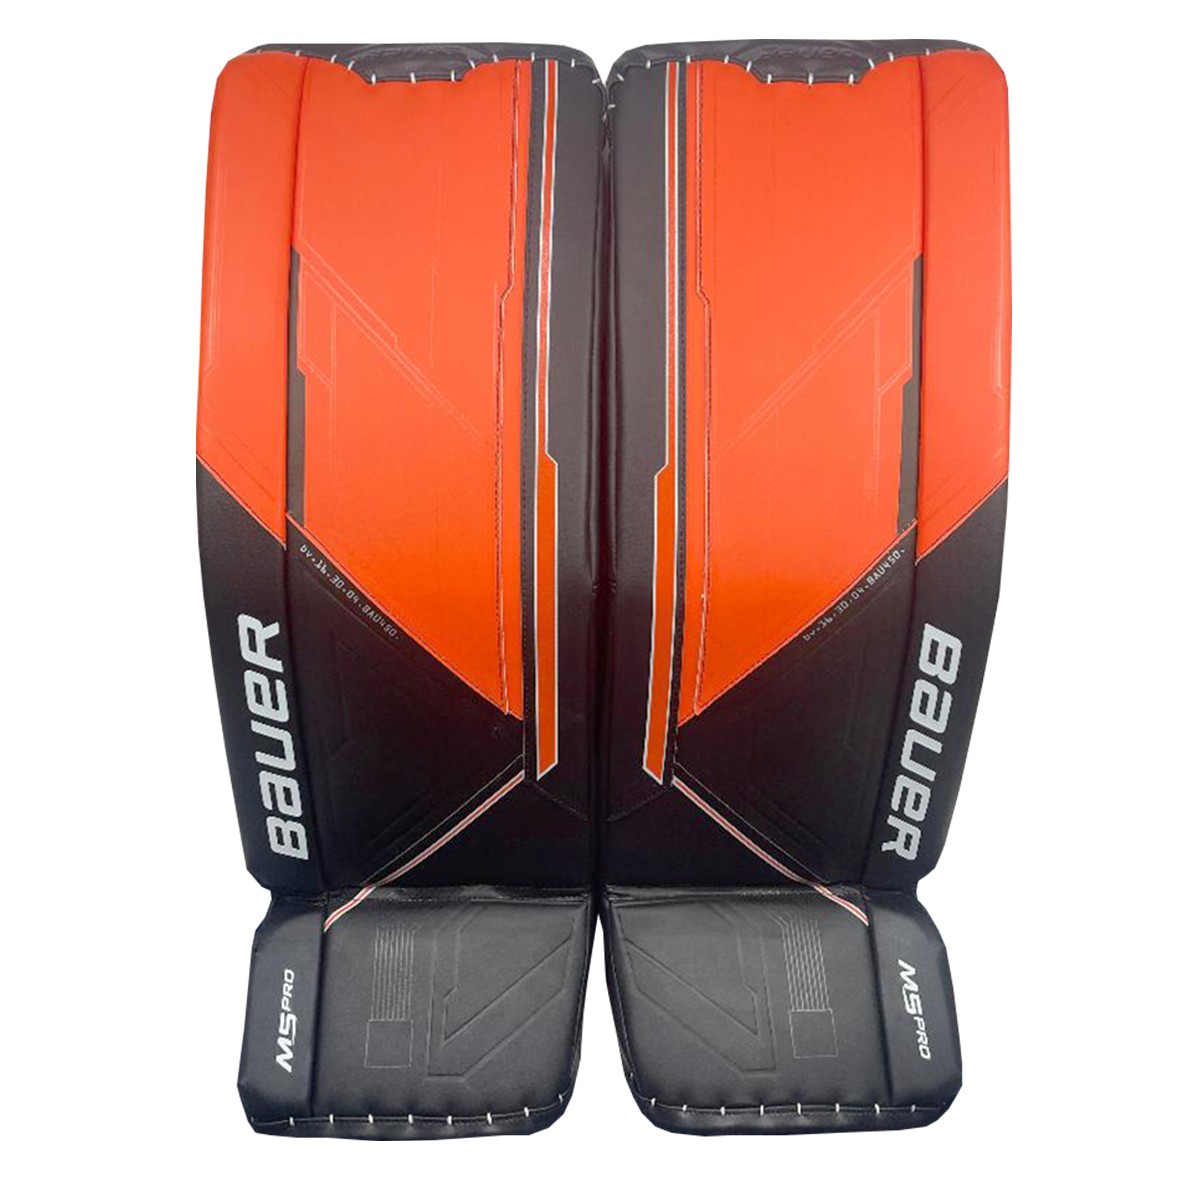 Ccm pro stock sizing - Pants + Knee Pads - THE GOAL[ie] NET[work]